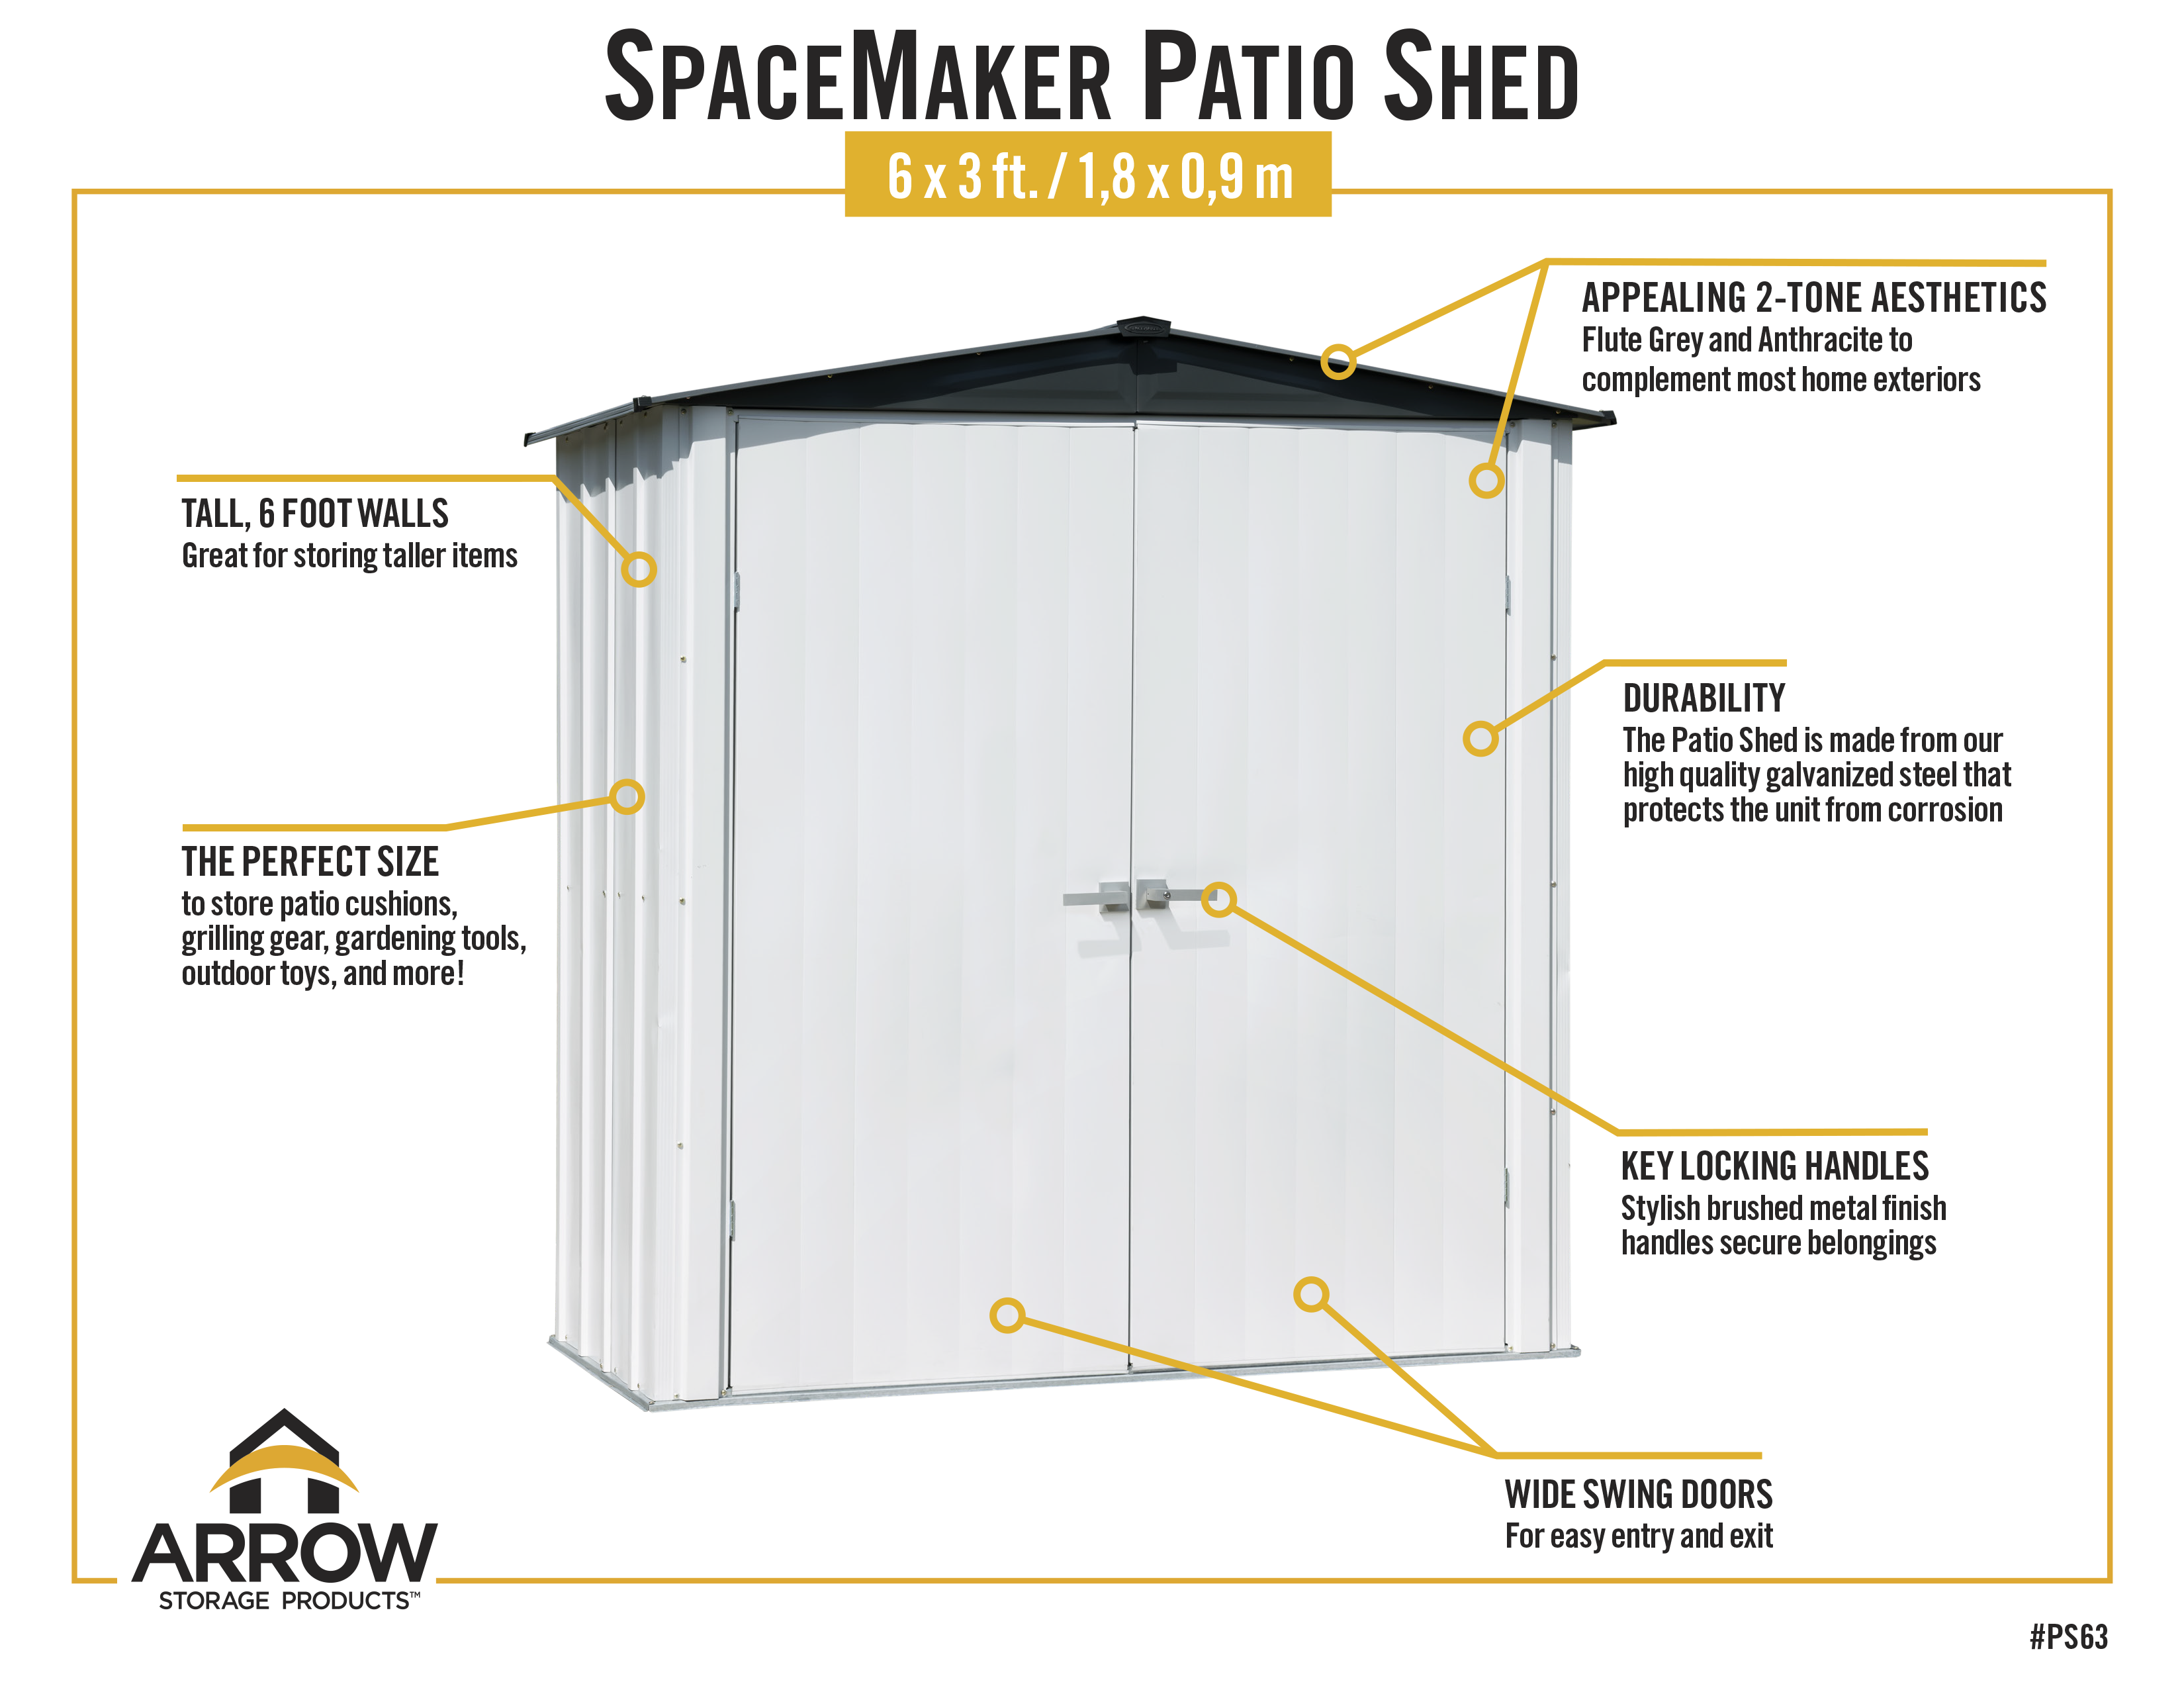 Spacemaker Patio Shed, 6x3